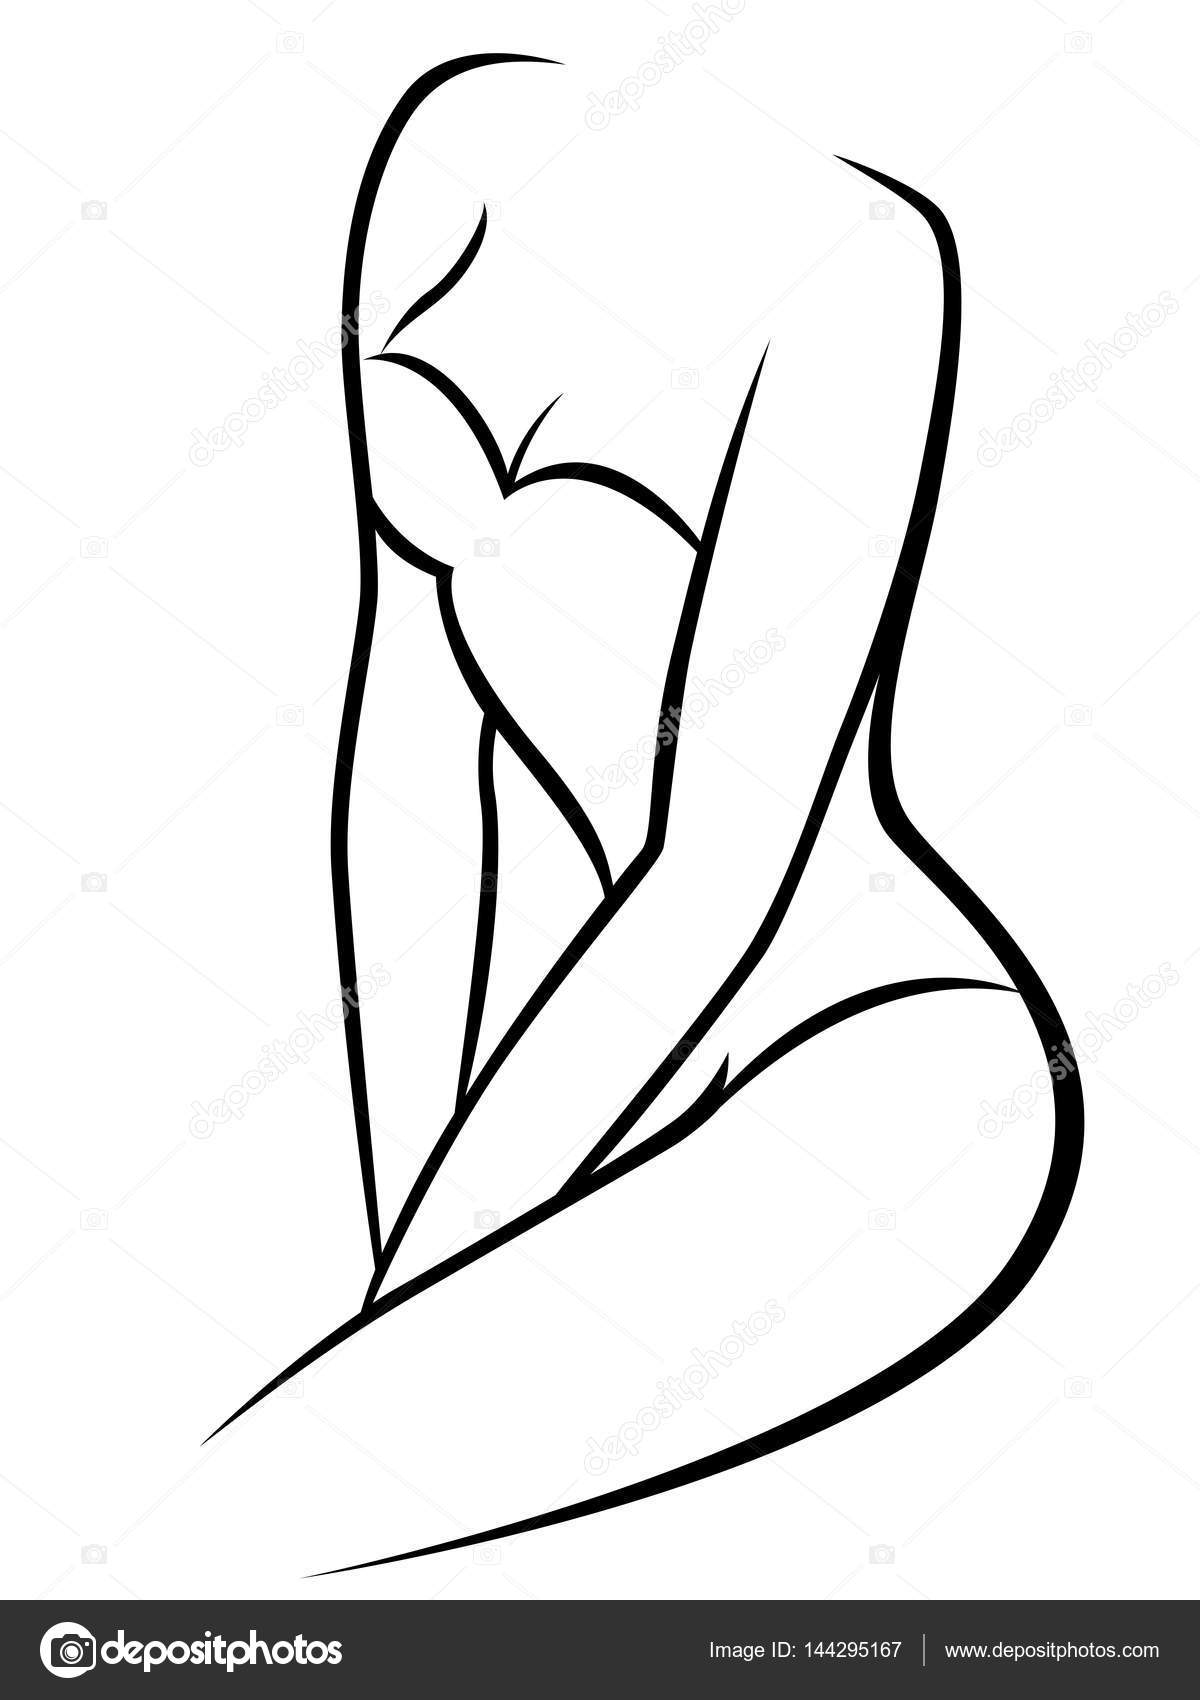 Stylized Human Figure Outline Clip Art Sketch Coloring Page